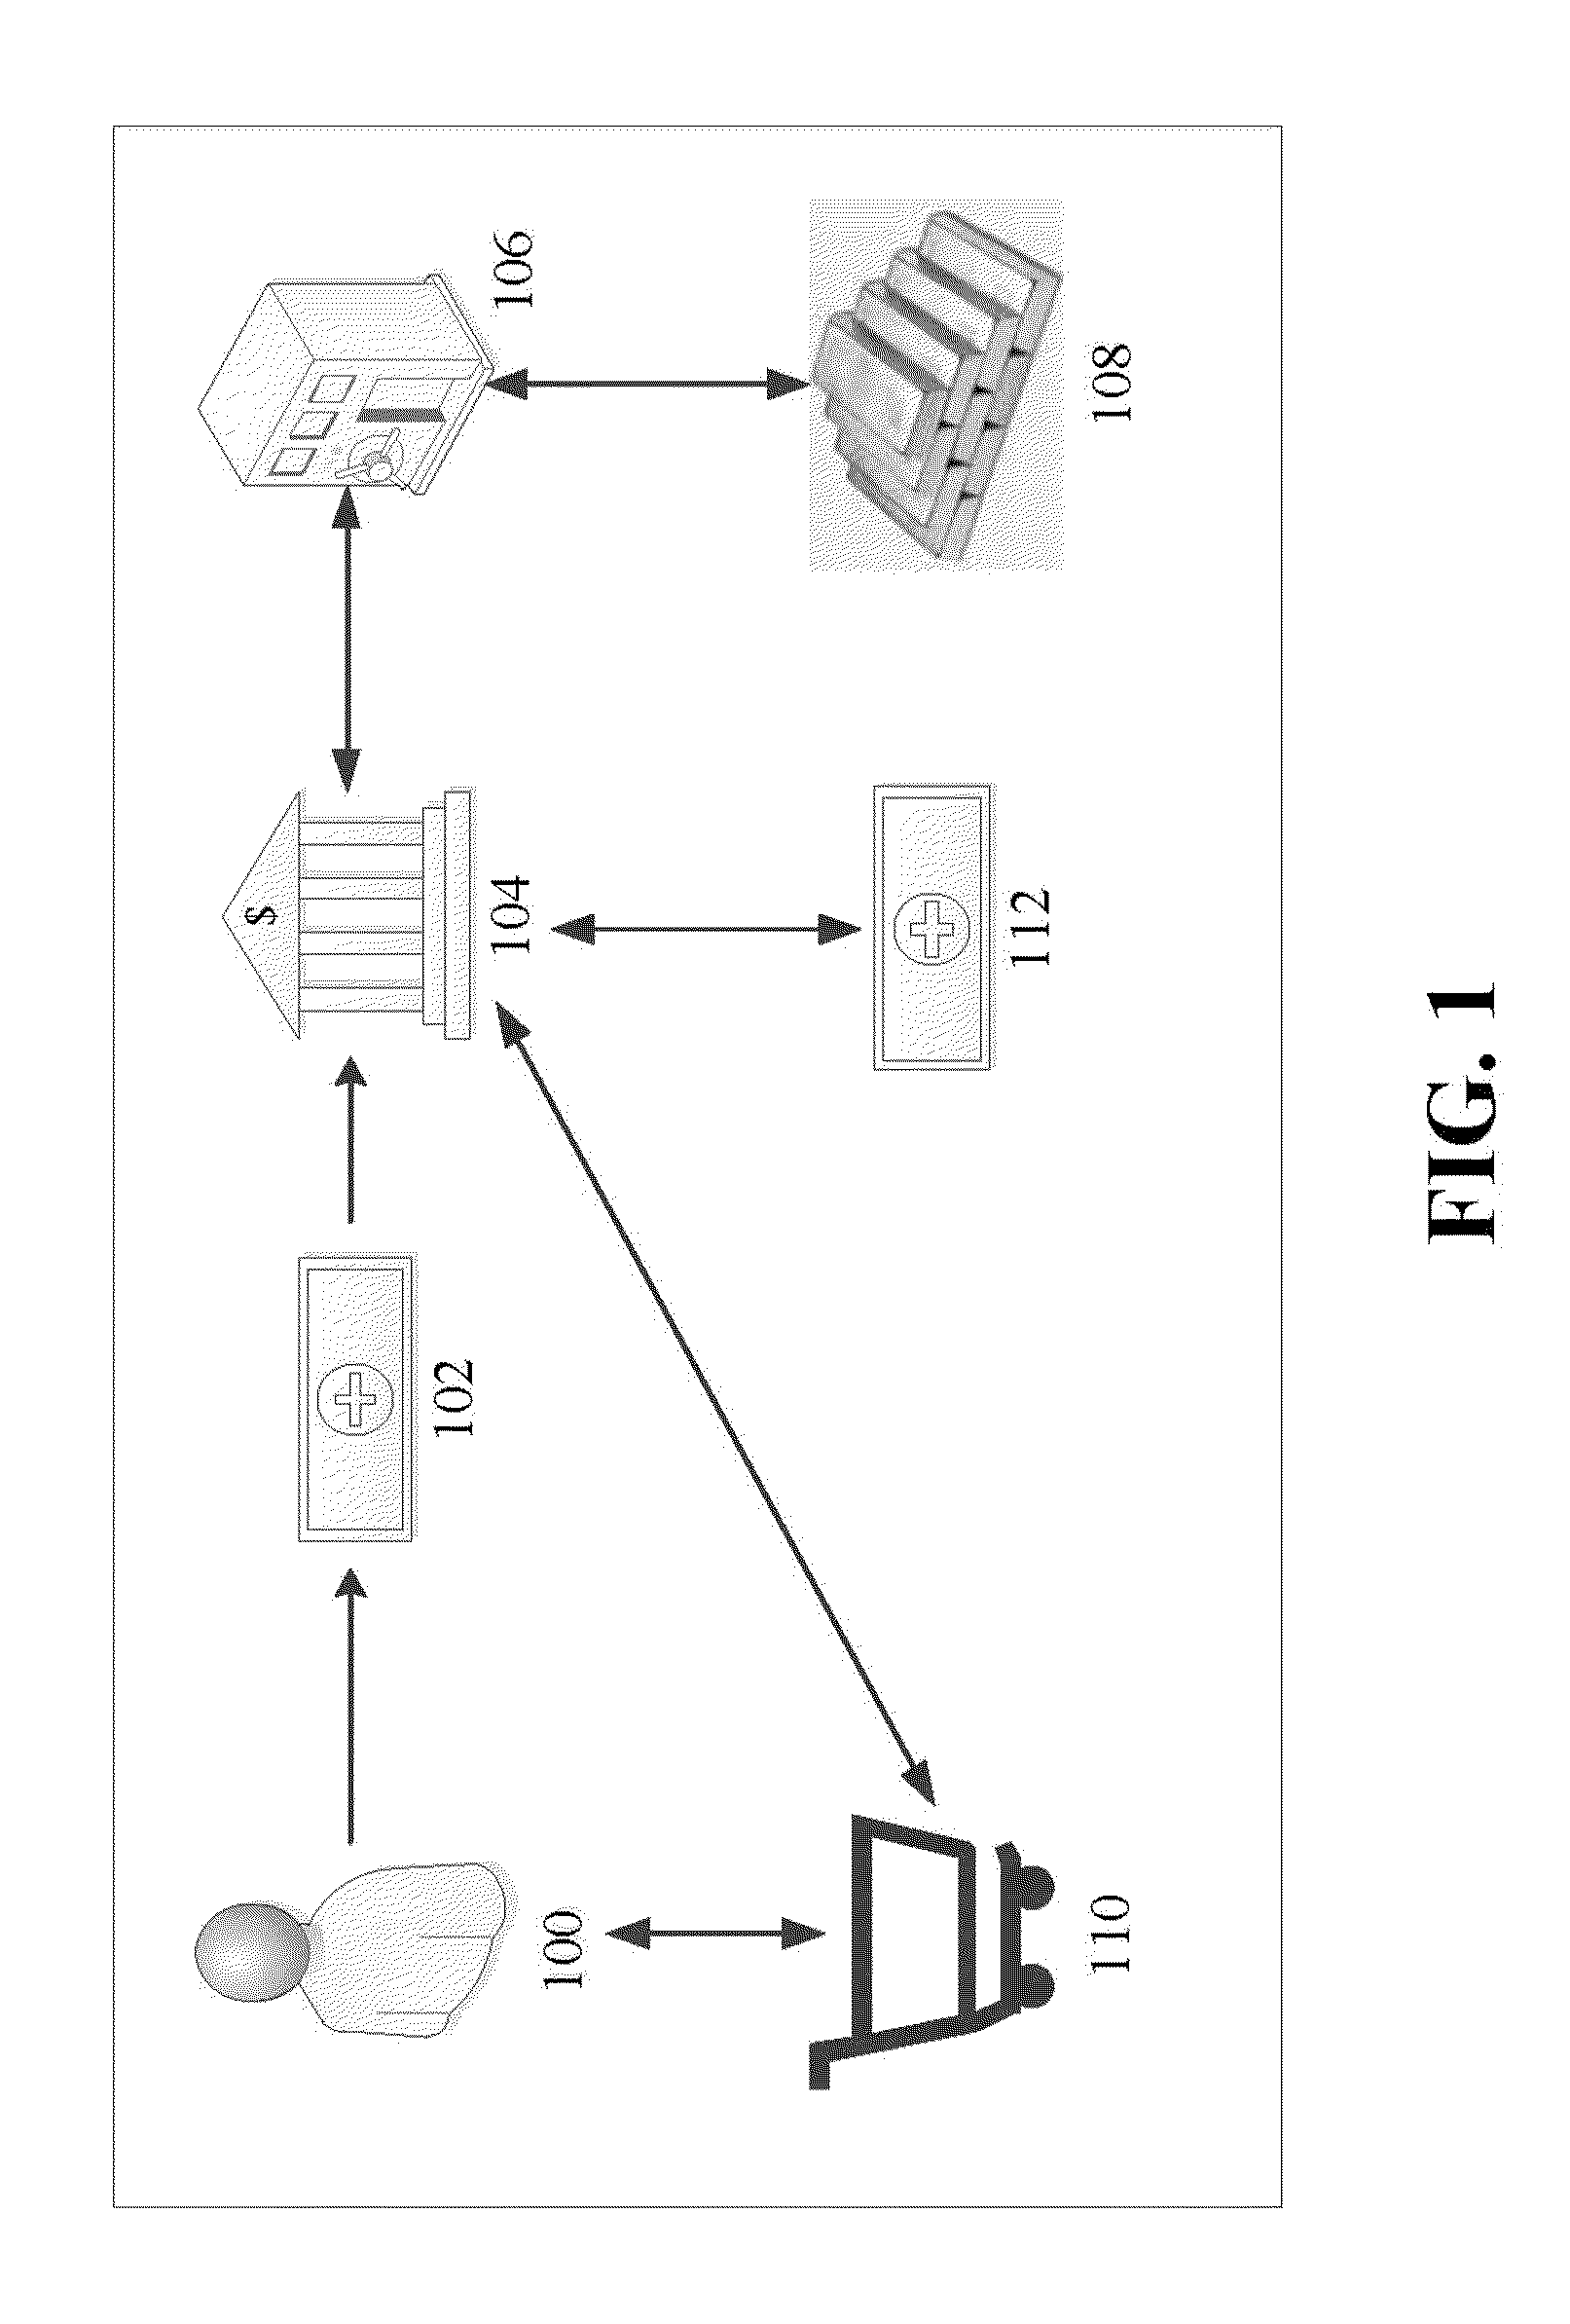 System and method for providing a pre-paid commodity-based credit account